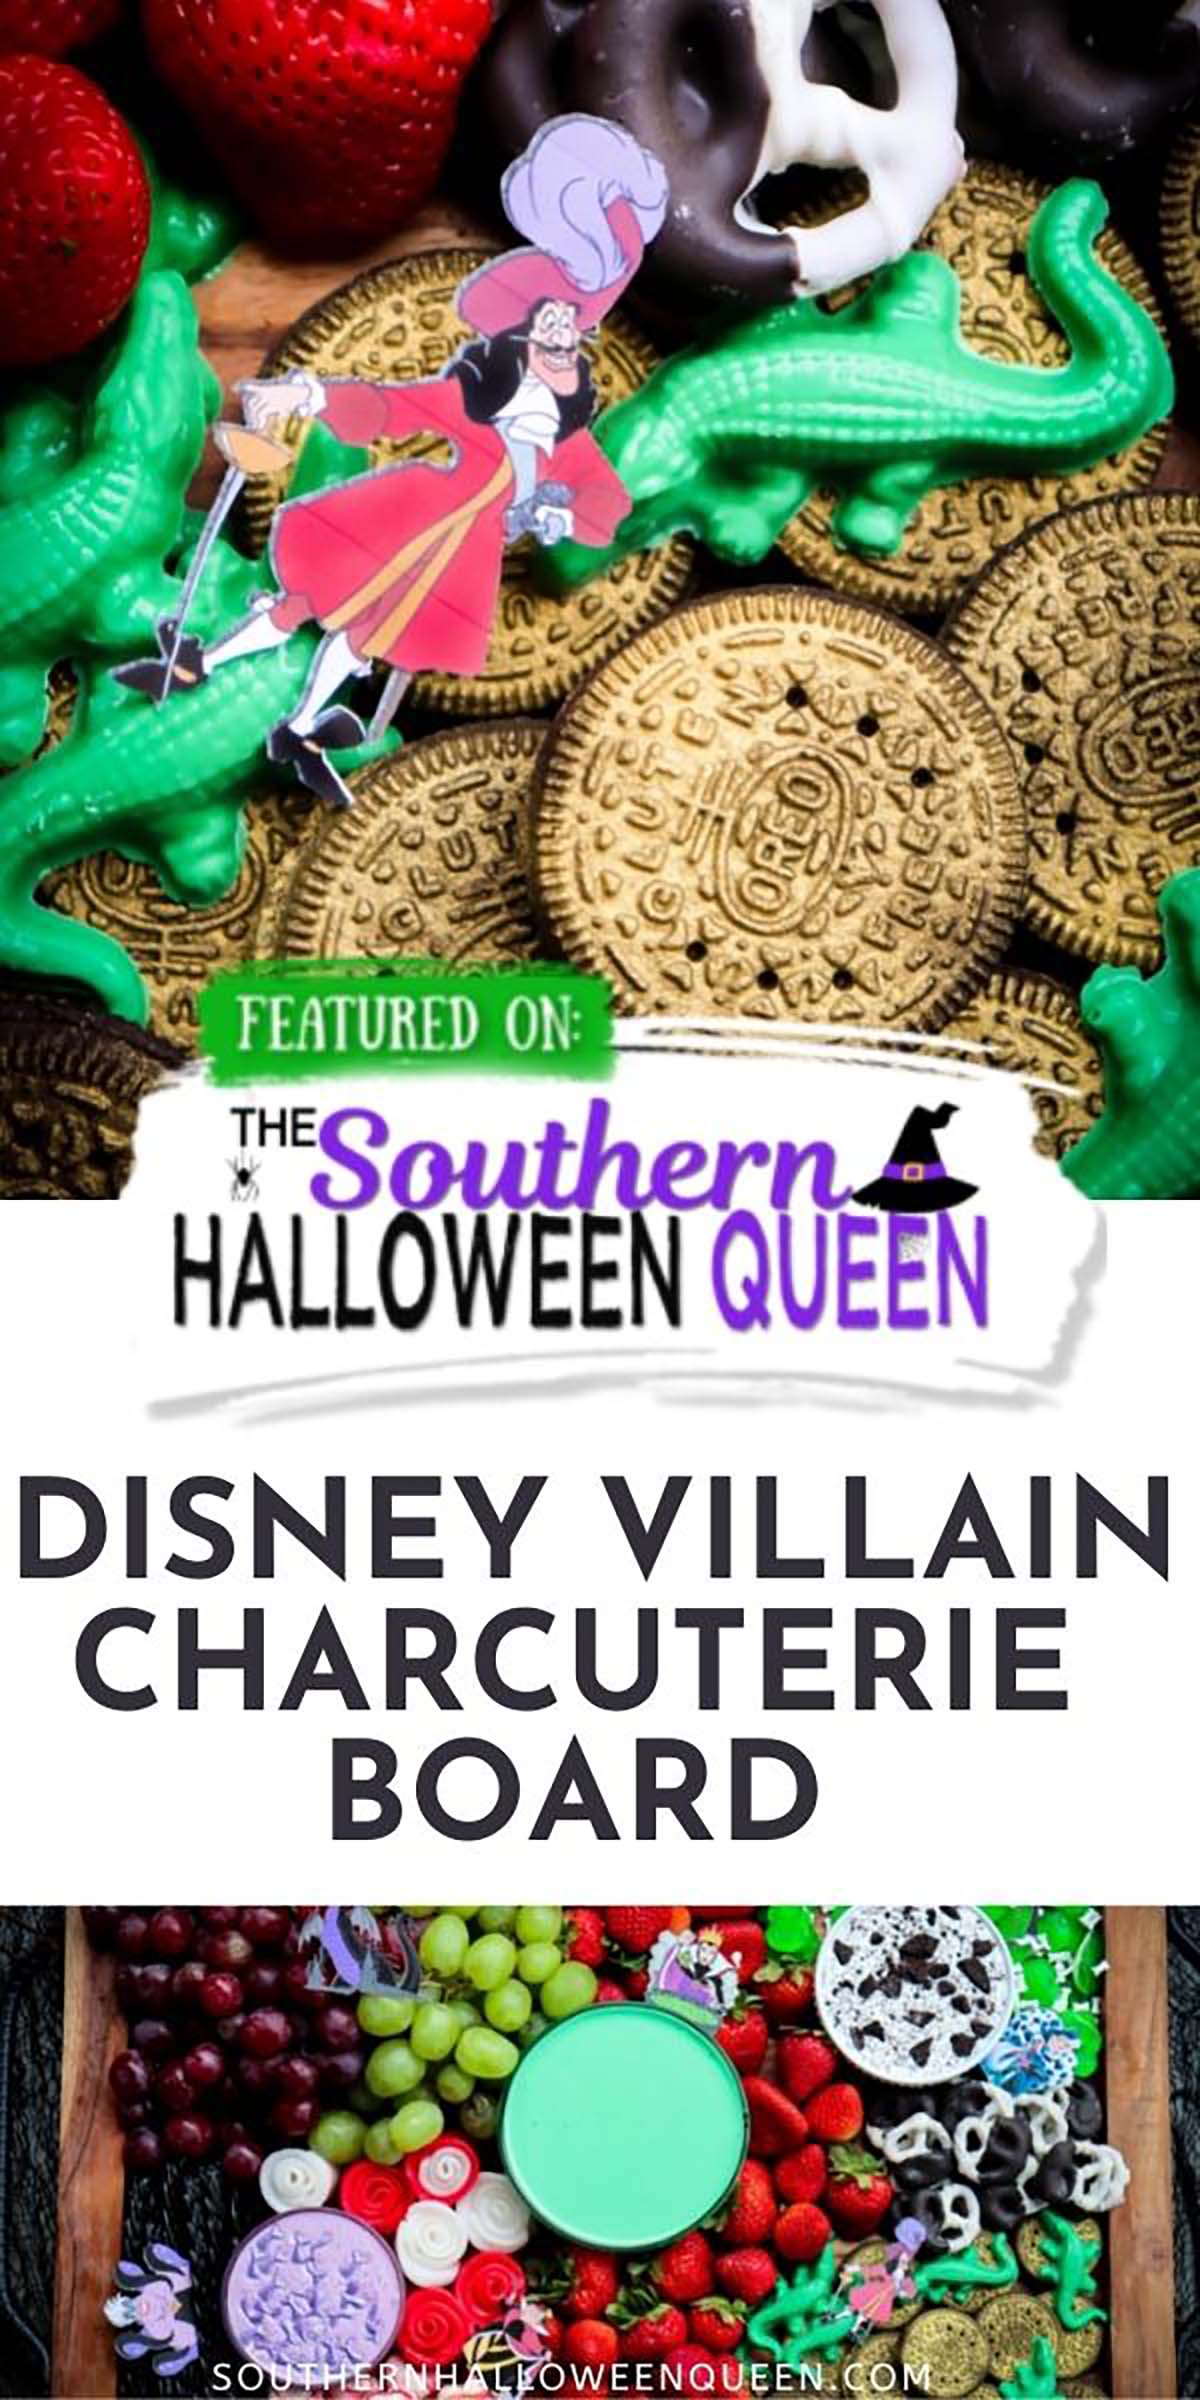 Look at how awesome this Disney Villain Charcuterie Board looks! Each Villain has their own food for the board that is themed to their story or personality.  via @southernhalloweenqueen